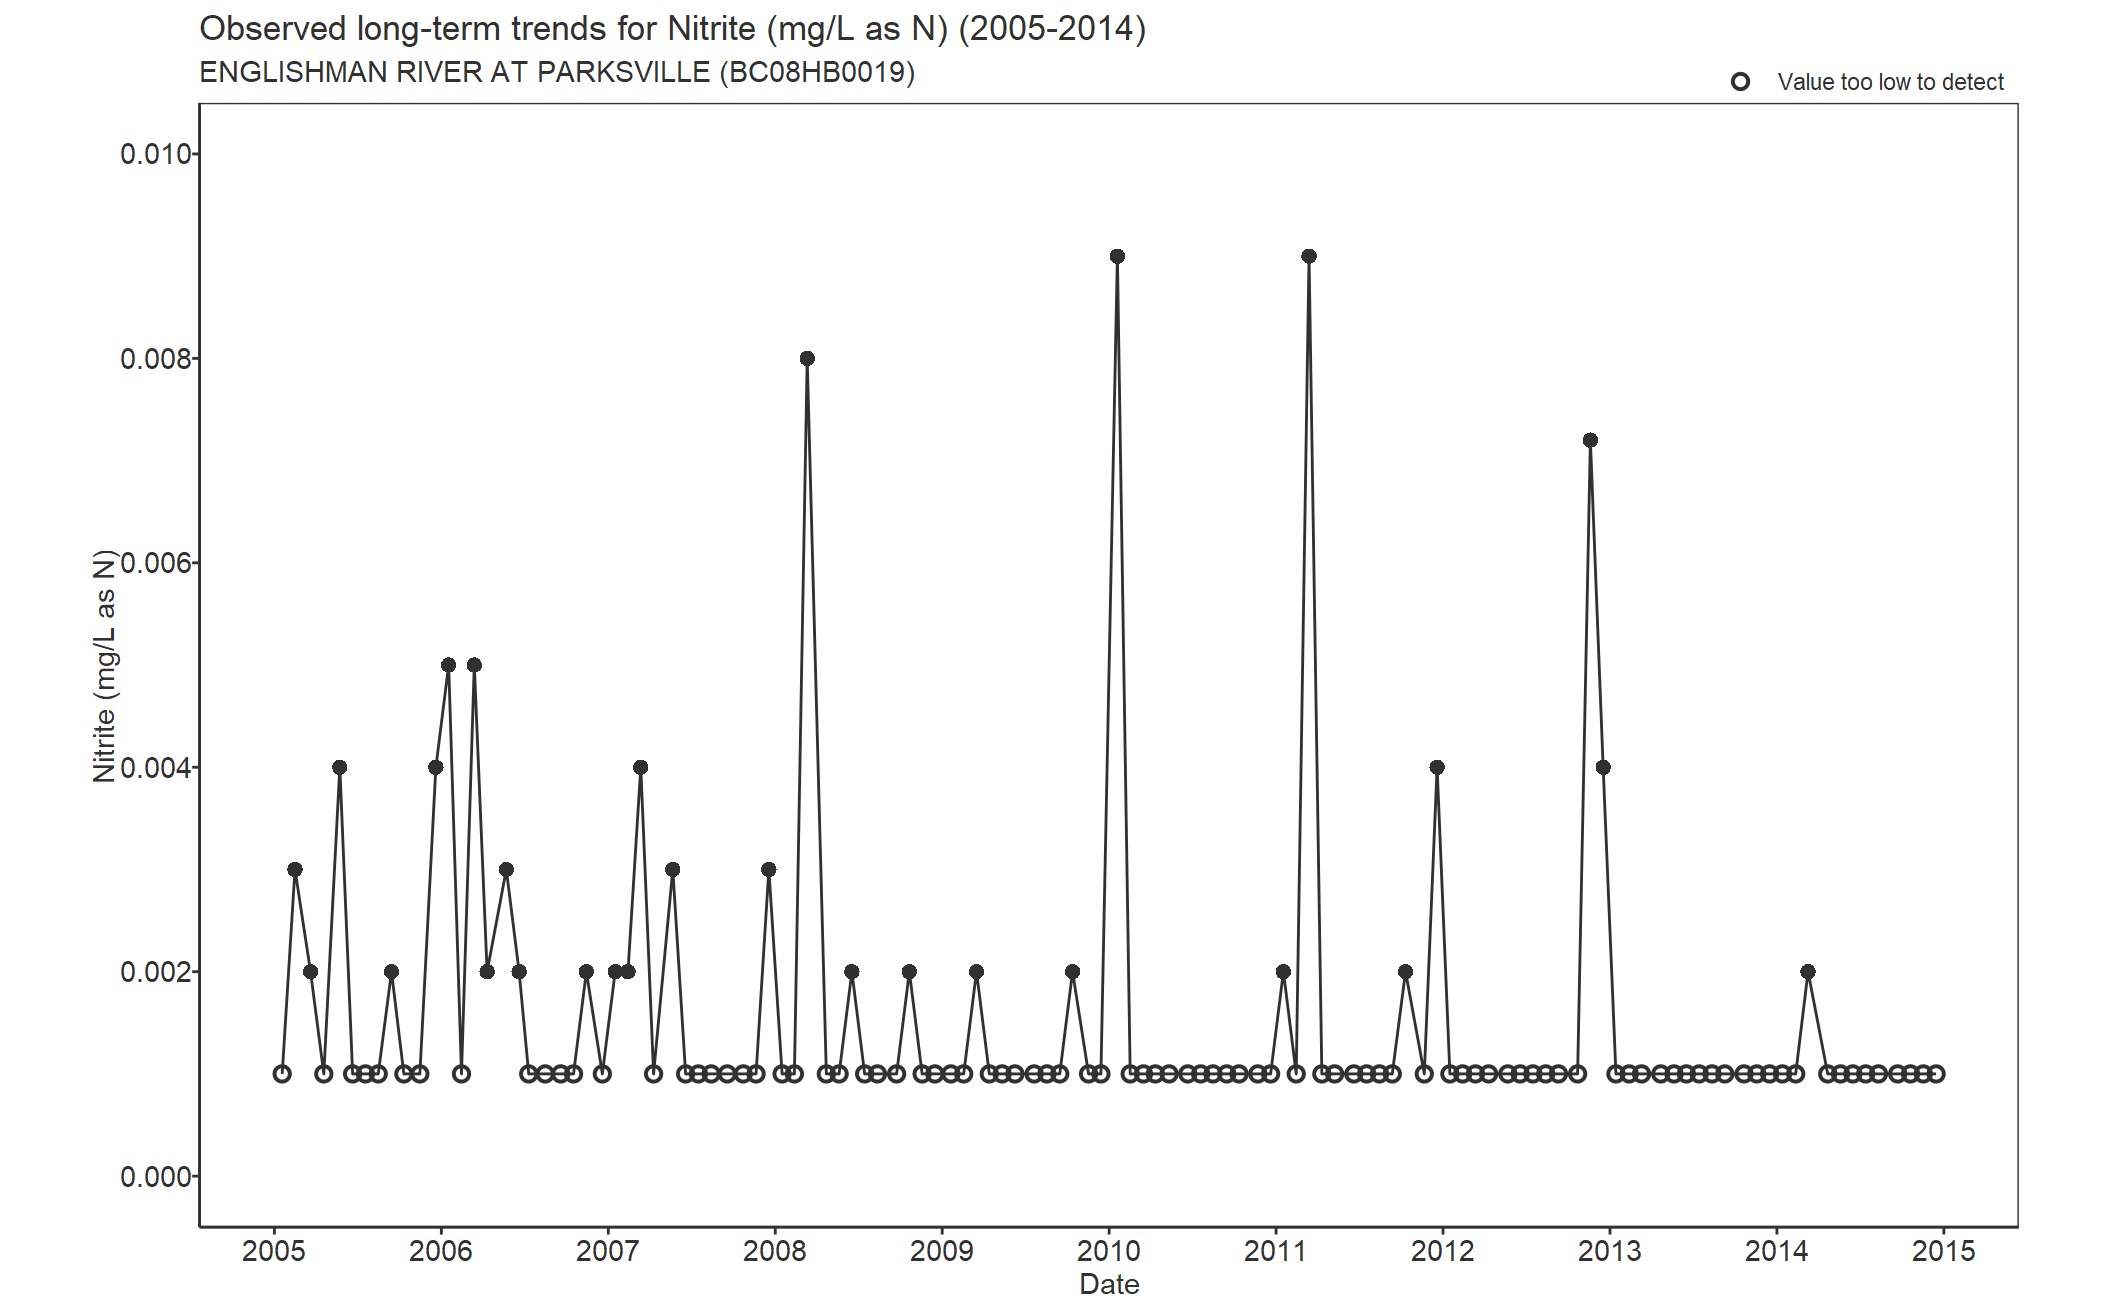 Observed long-term trends for Nitrite (2005-2014)